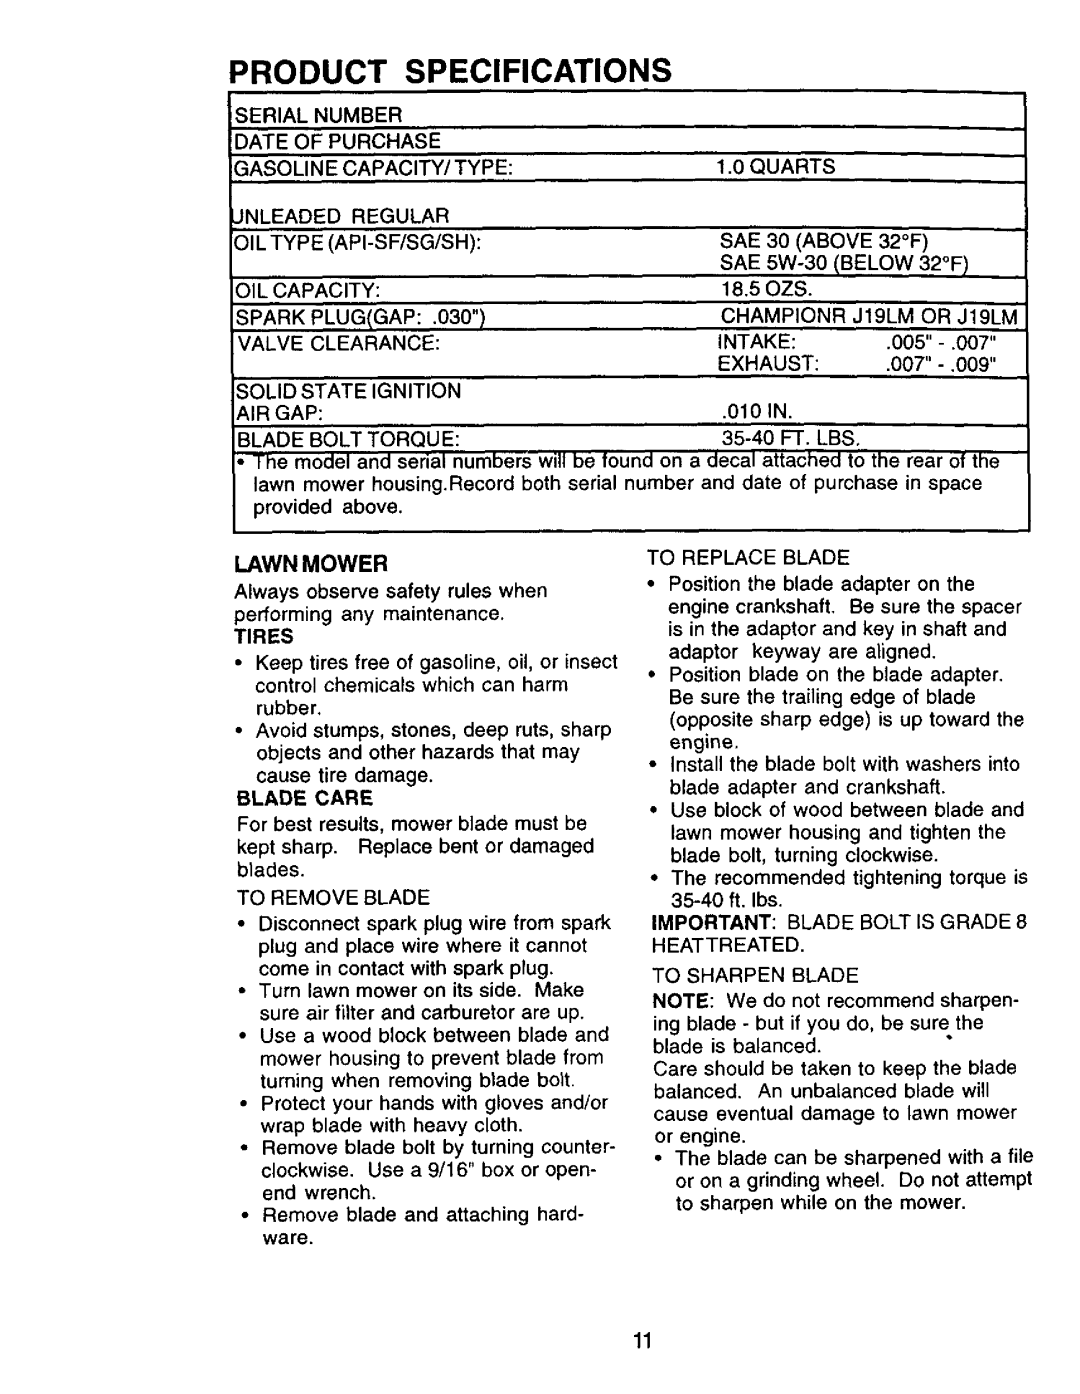 Craftsman 917.379480 owner manual Product, Specifications, Lawn Mower 